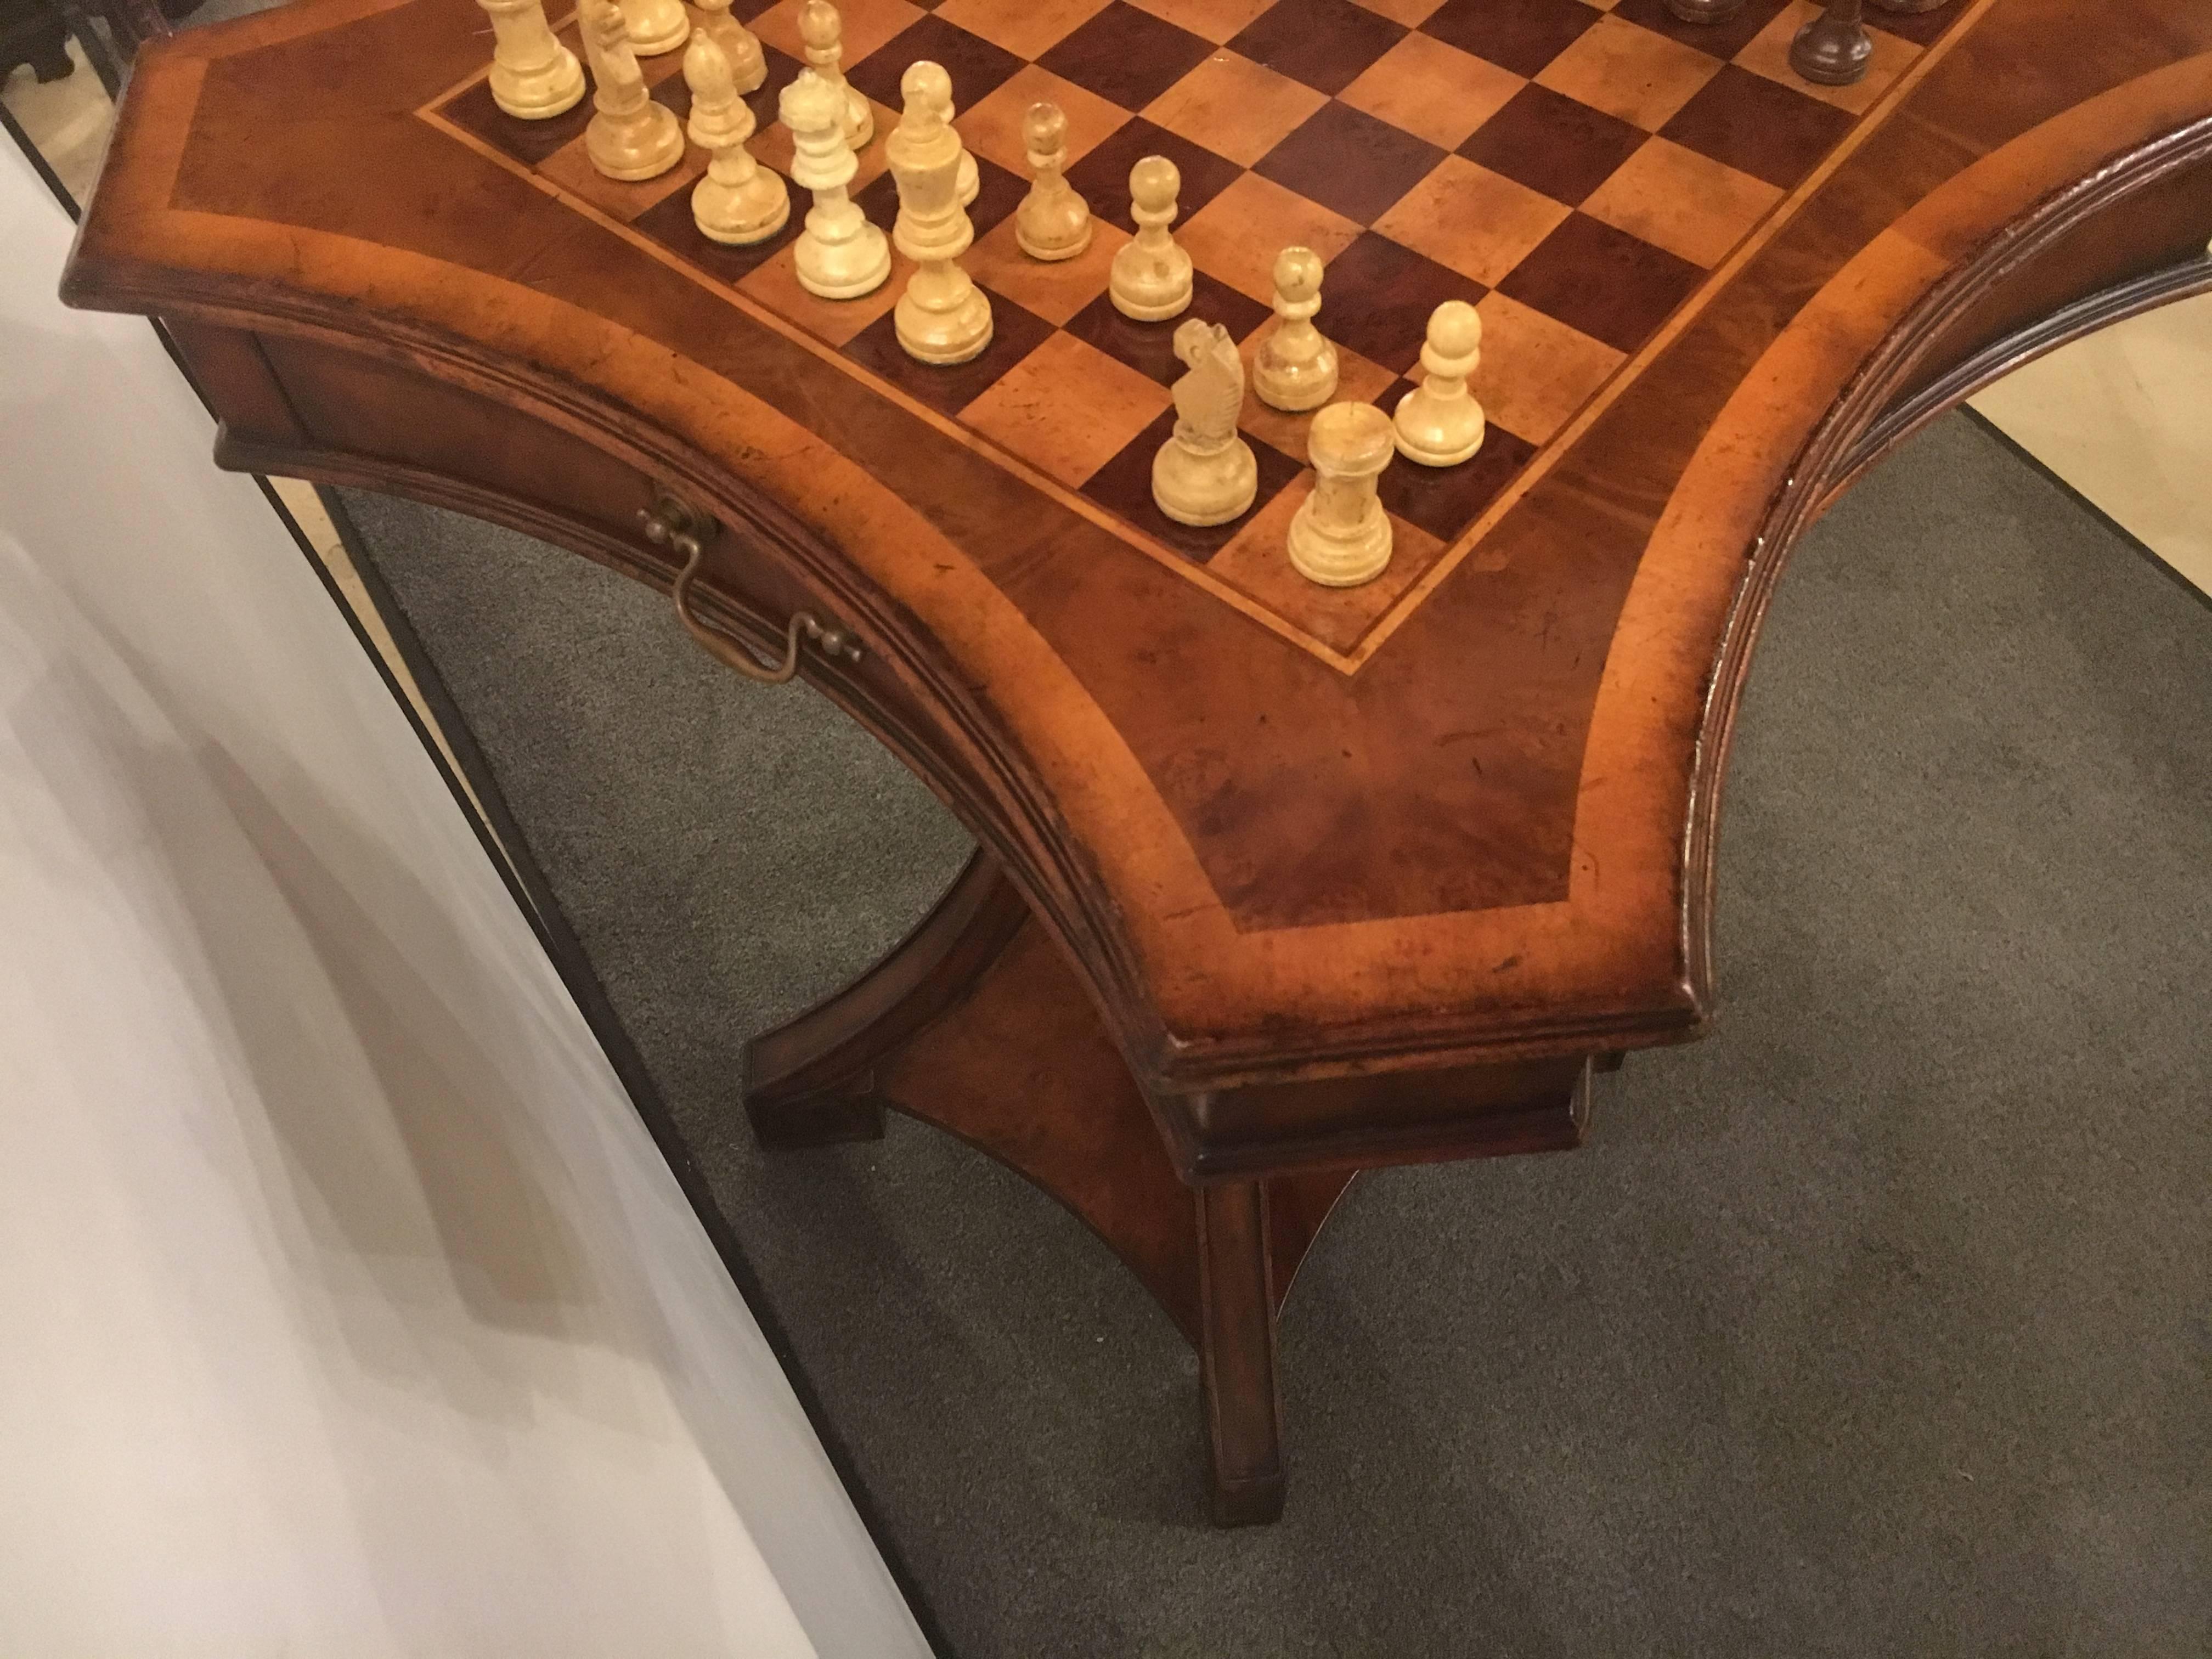 A Jonathon Charles Chess games table. Missing one bishop this spectacular stylish games table has one oak interior drawer and stands in fine condition. Inlaid and handmade.